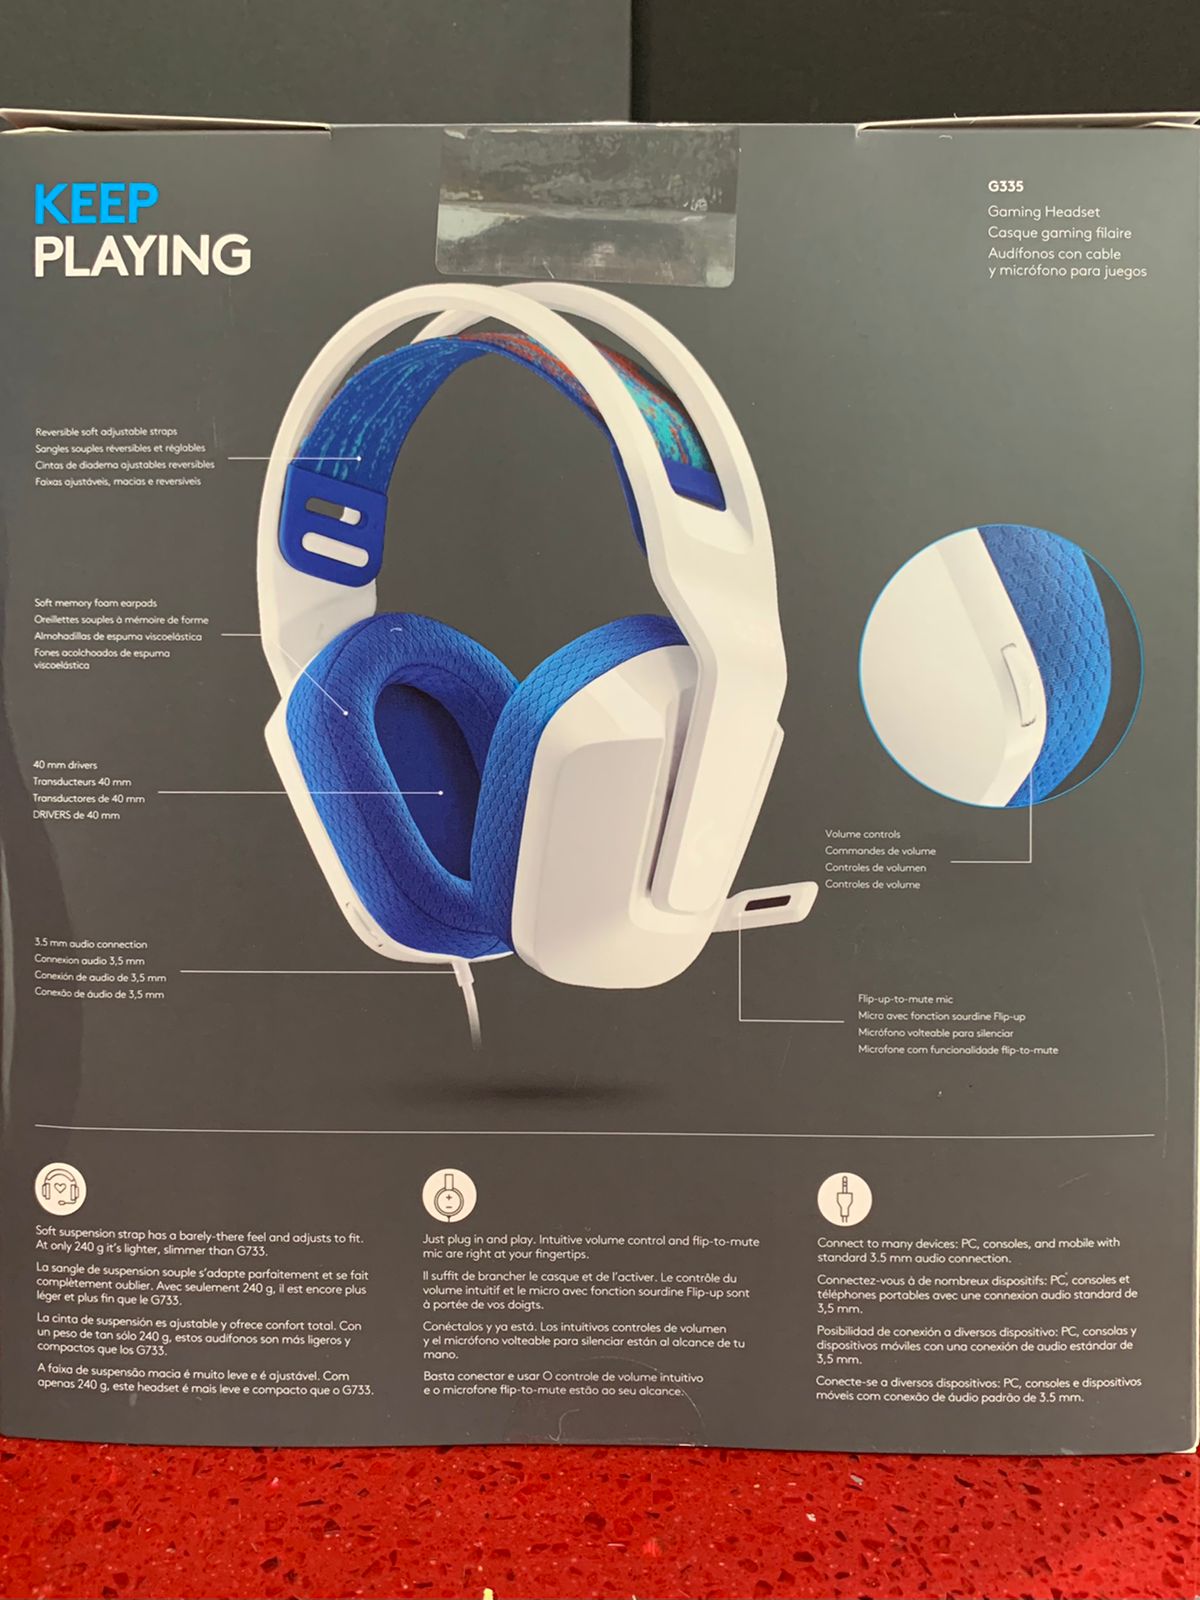 Auriculares Gamer Logitech G335 Blancos PC PS4 Xbox Switch